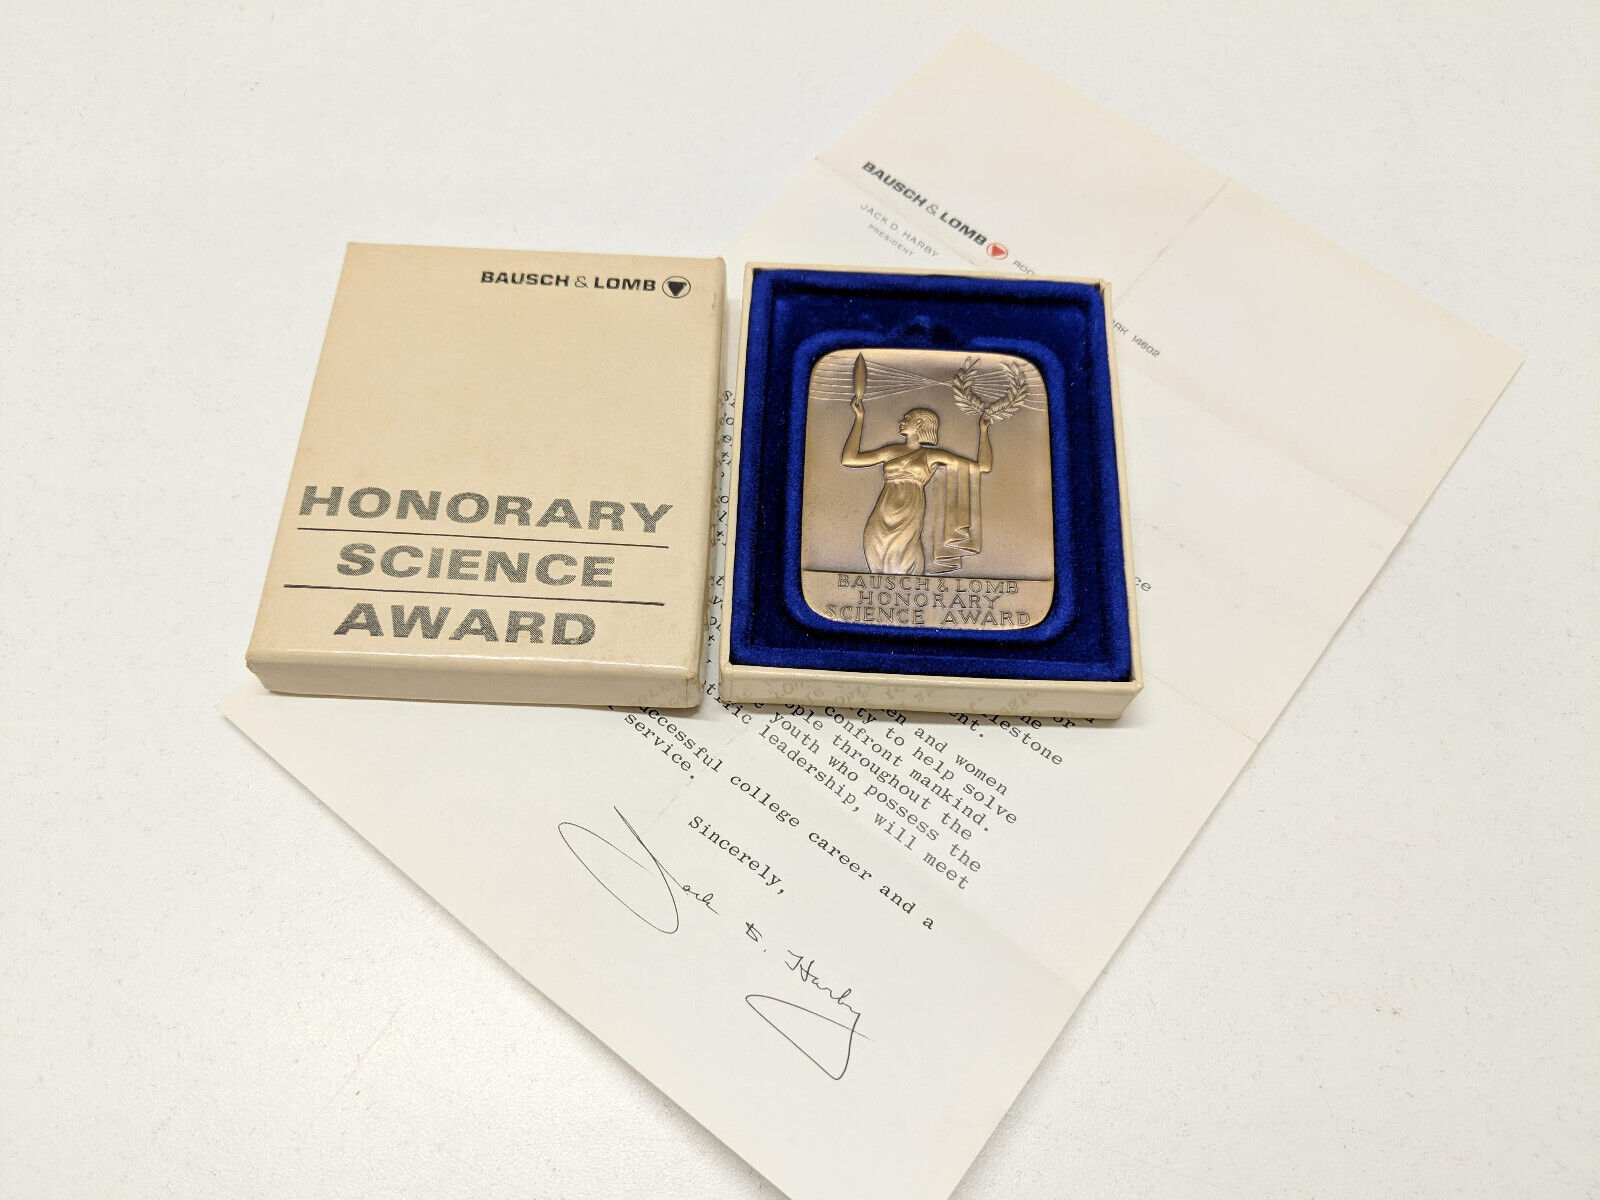 Vintage Bausch & Lomb Honorary Science Award Medal w/ Box & Insert